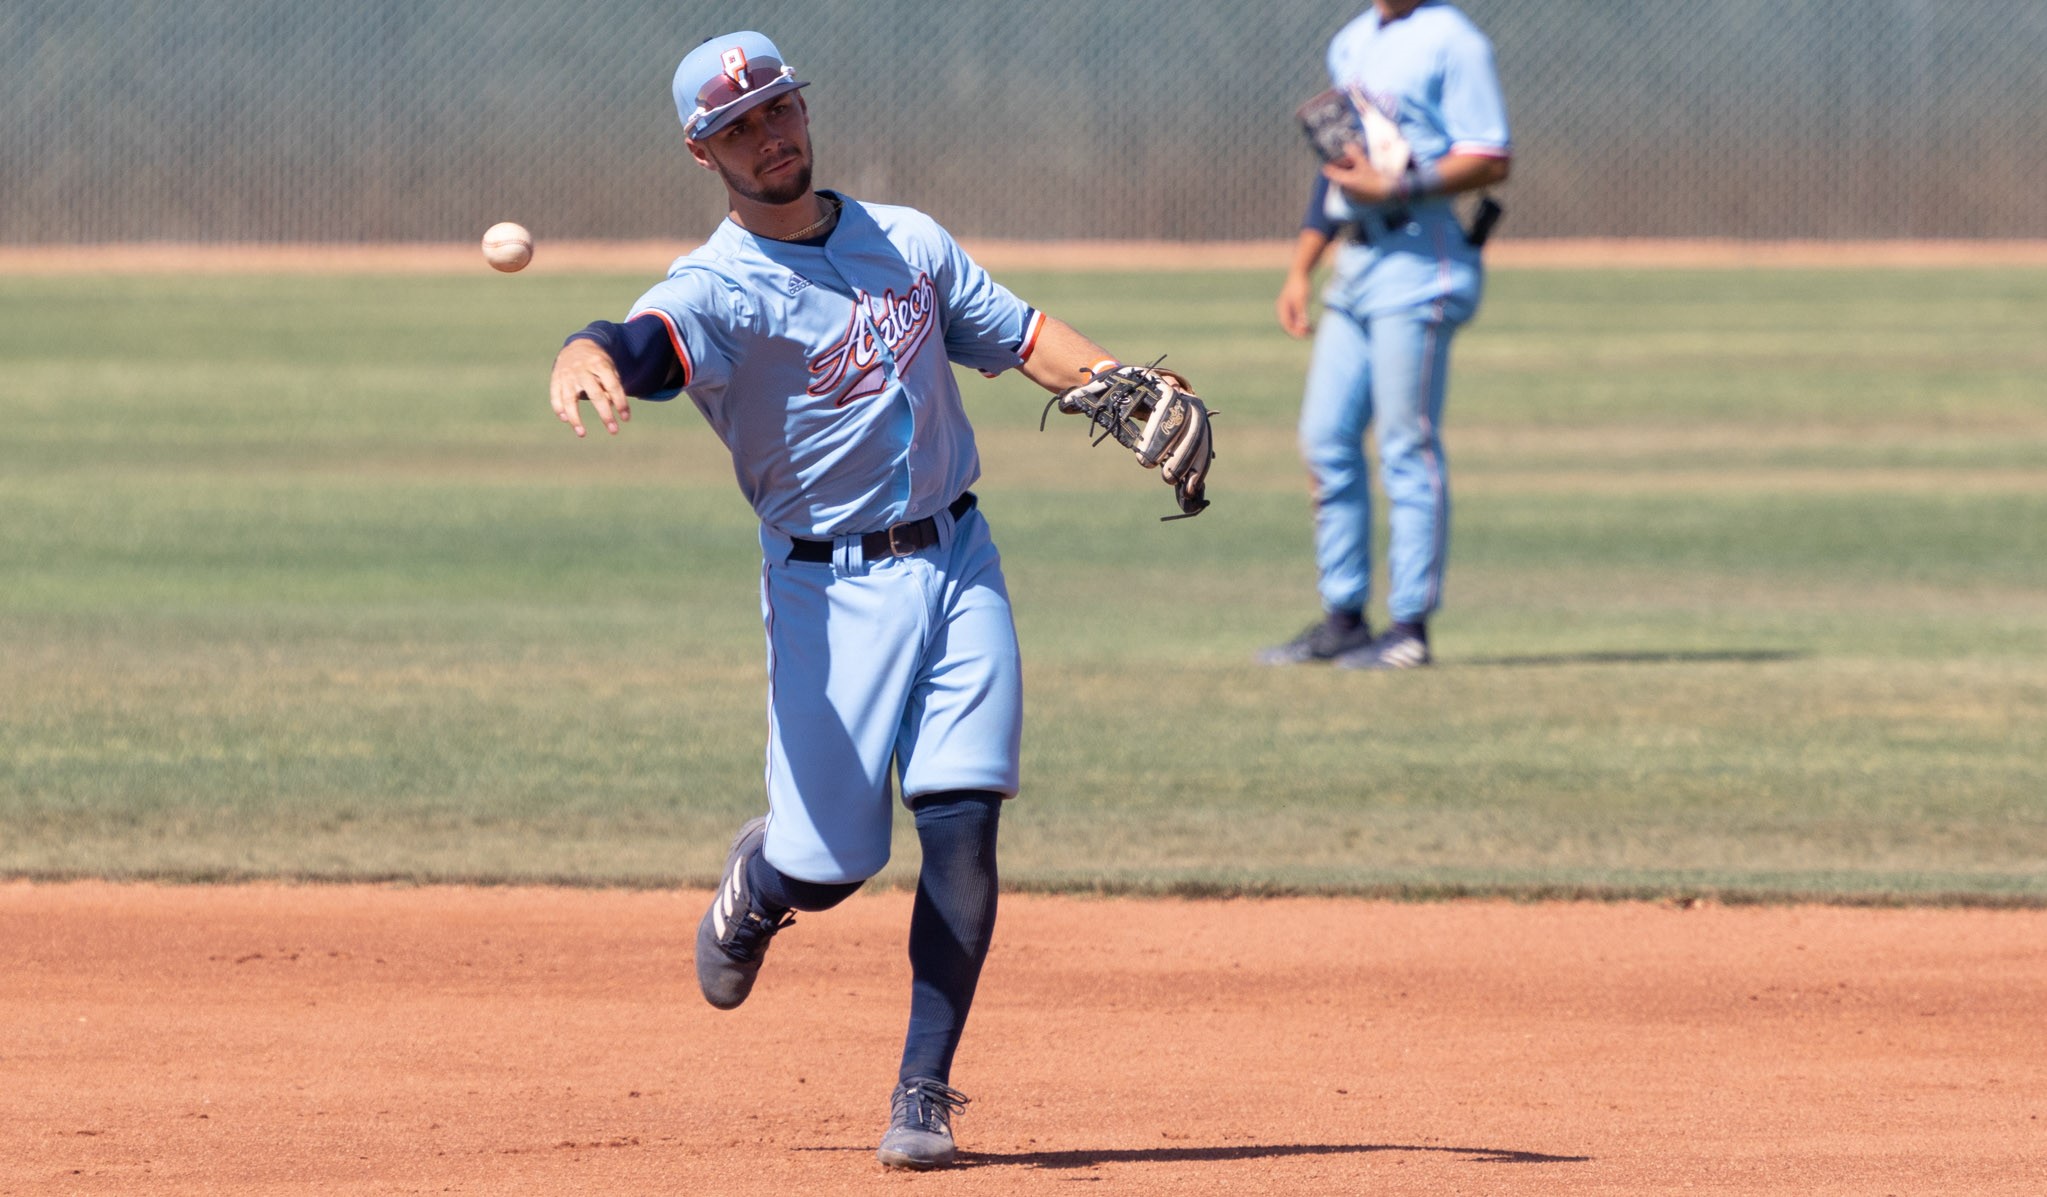 Sophomore Braedon Mondeau (Cienega HS) produced with a two-run RBI single in the second game as the Aztecs baseball team split at Eastern Arizona College to finish the regular season at 41-15 overall and 26-12 in ACCAC play. They will be the No. 3 seed and will play a best-of-3 series at No. 2 South Mountain Community College in the NJCAA Region I, Division I Semifinals. Photo by Stephanie van Latum